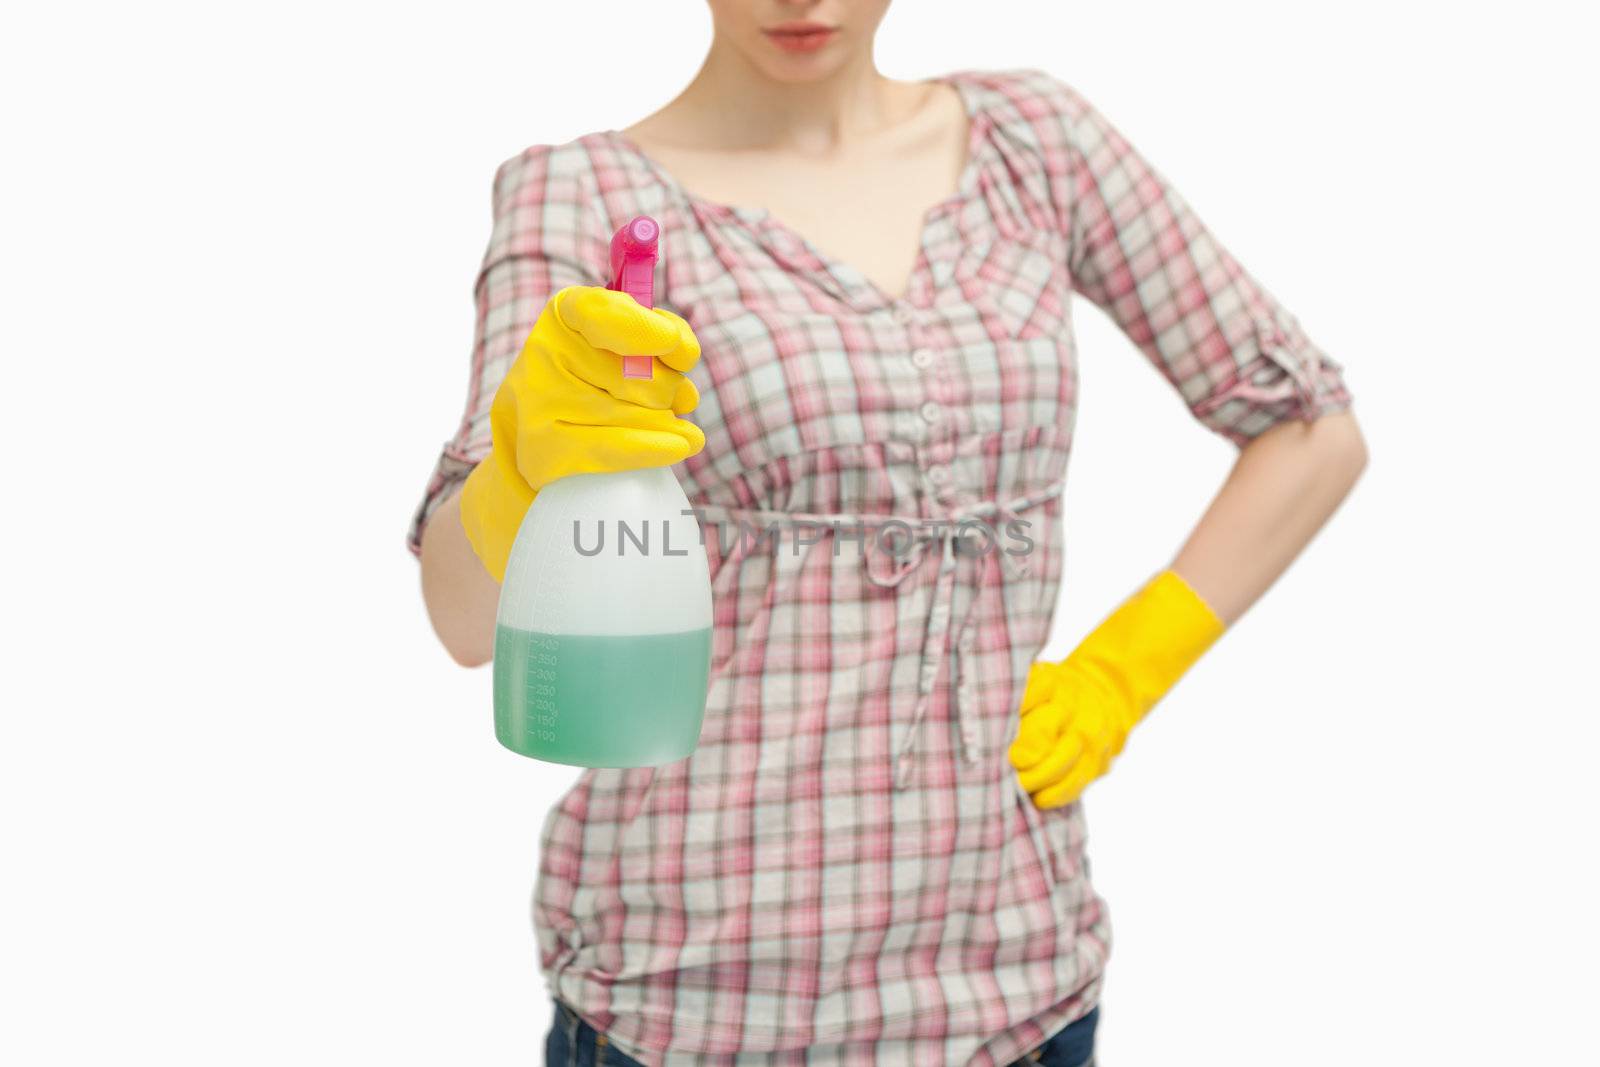 Close up of a woman holding a spray bottle against white background